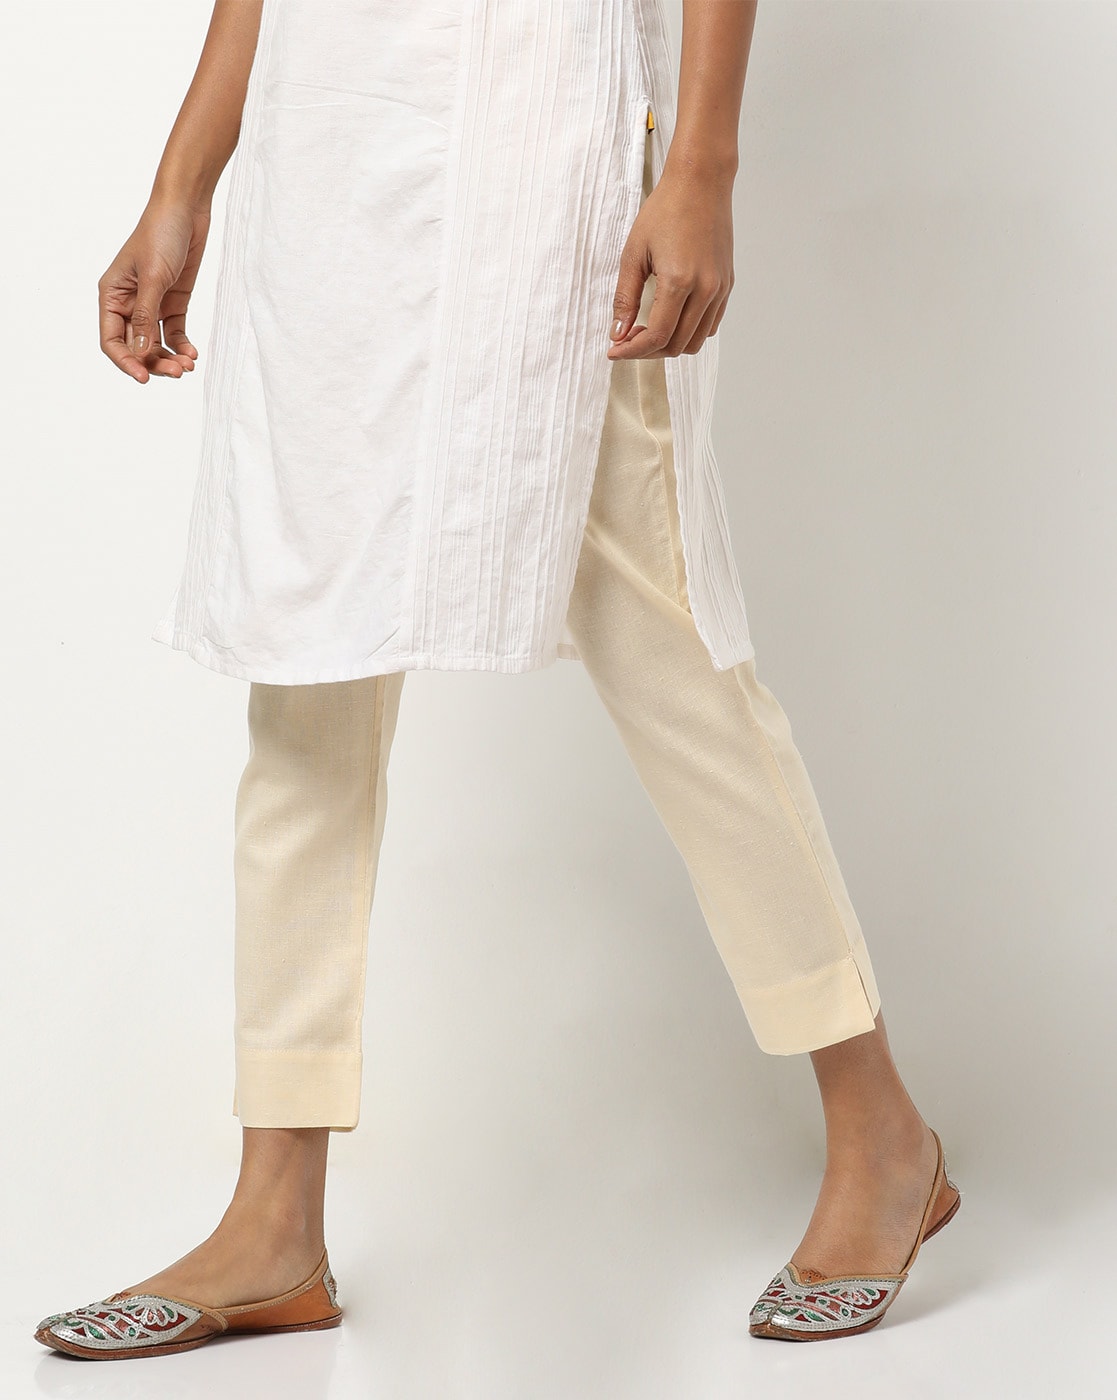 Washable Ladies Cigarette Pants at Best Price in Mira Bhayandar  Luxostyle